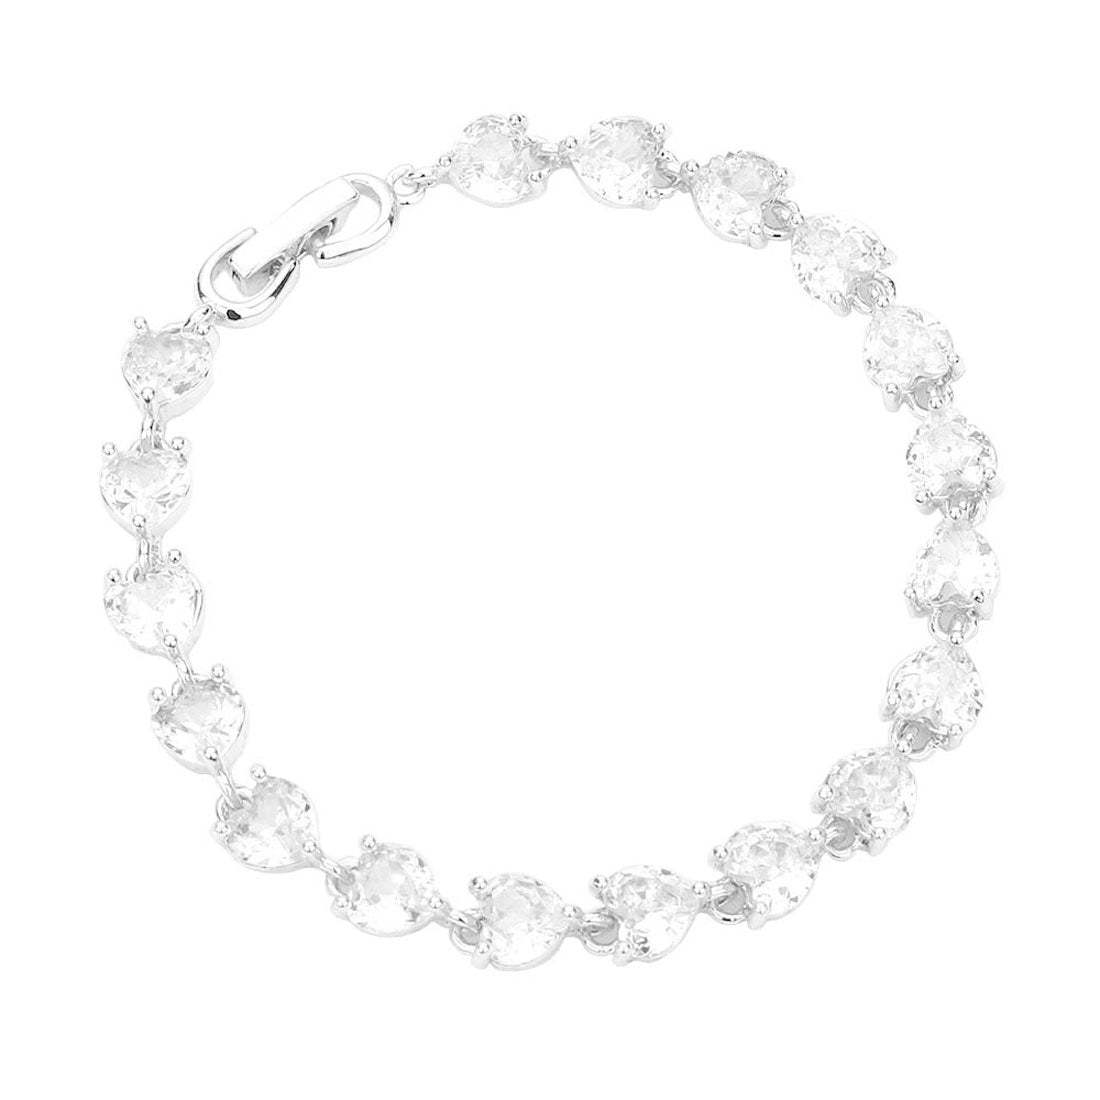 SIlver CZ Heart Link Evening Bracelet. These Metal bracelets are easy to put on, take off and so comfortable for daily wear. Pair these with tee and jeans and you are good to go. It will be your new favorite go-to accessory. Perfect Birthday gift, friendship day, Mother's Day, Graduation Gift.